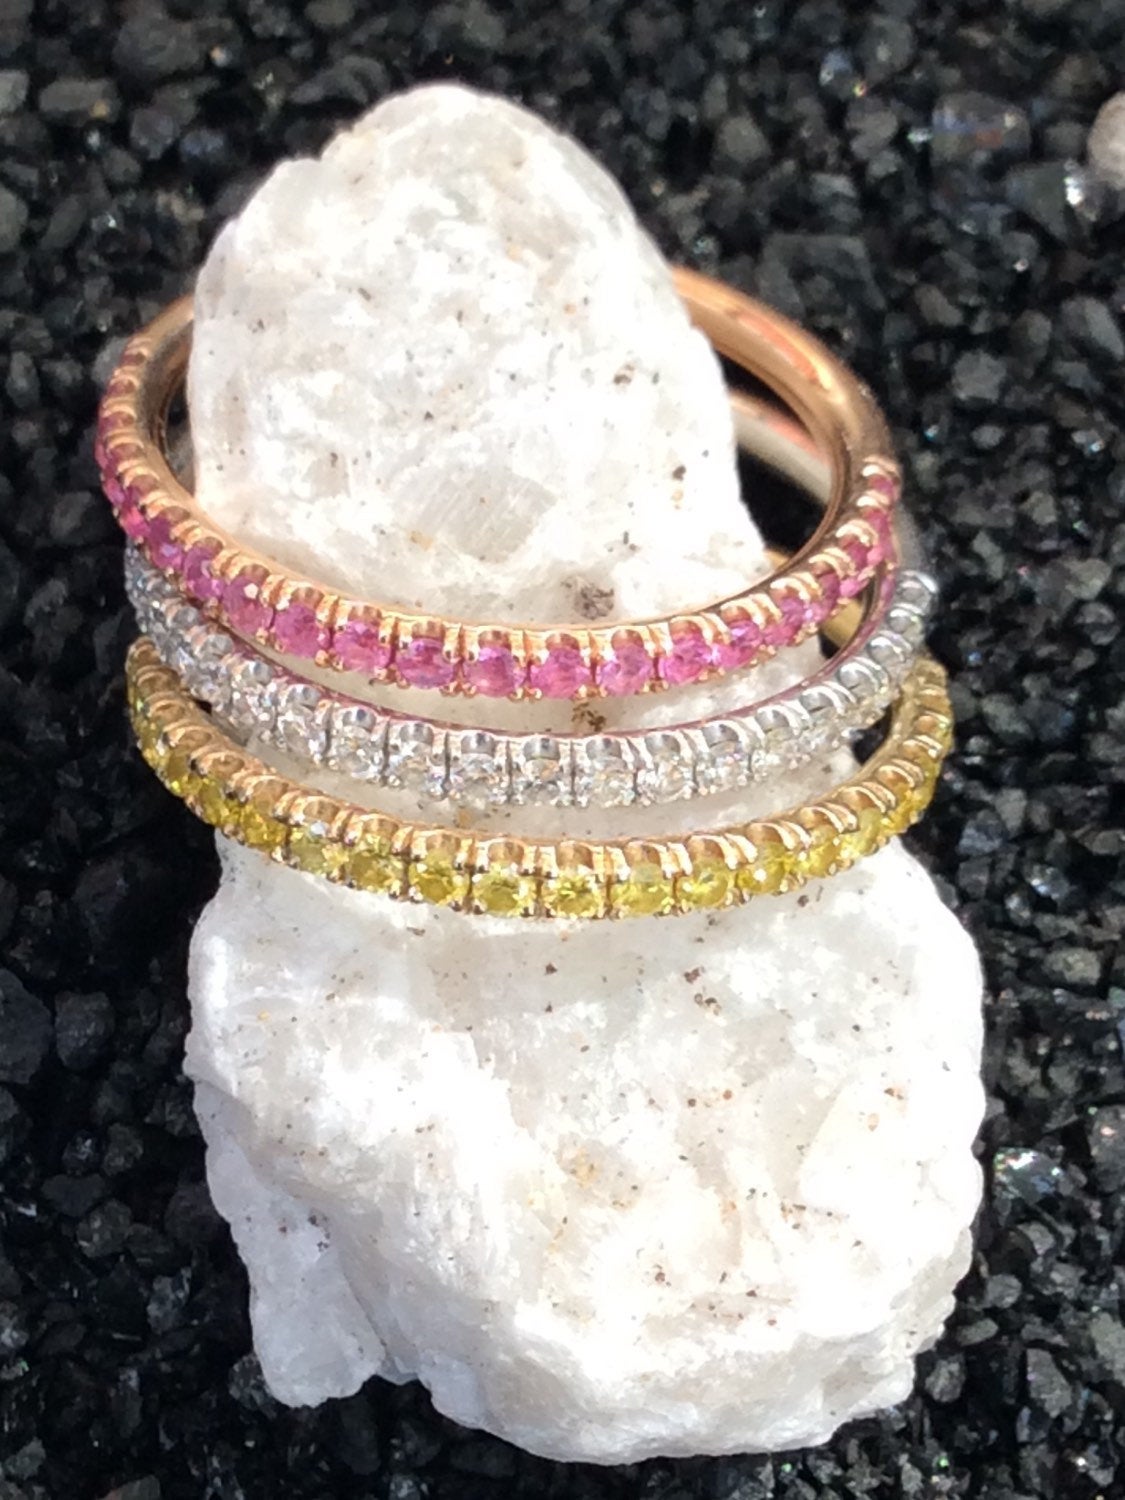 Set of 3; 1.6mm Half Eternity Pink, Yellow, and White Sapphire 14K Pave Stacking Rings